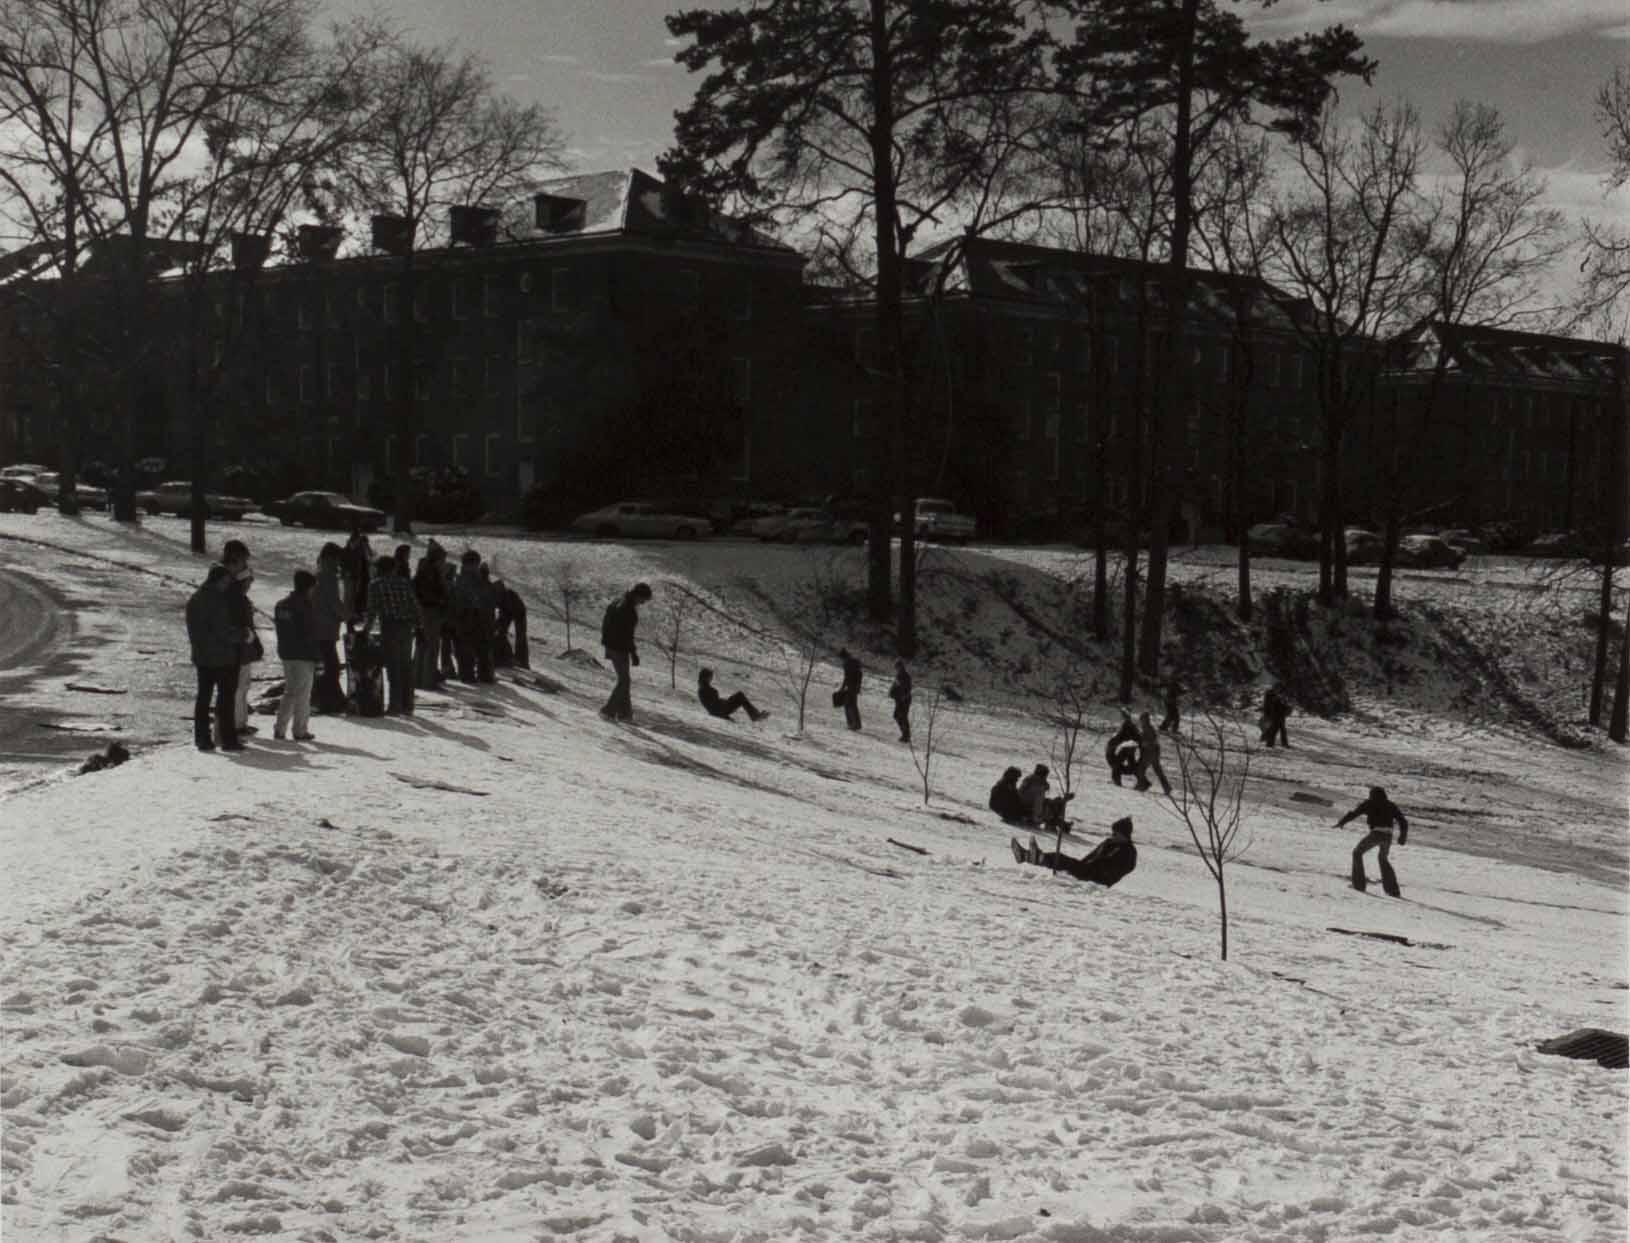 Students sliding down snowy hill